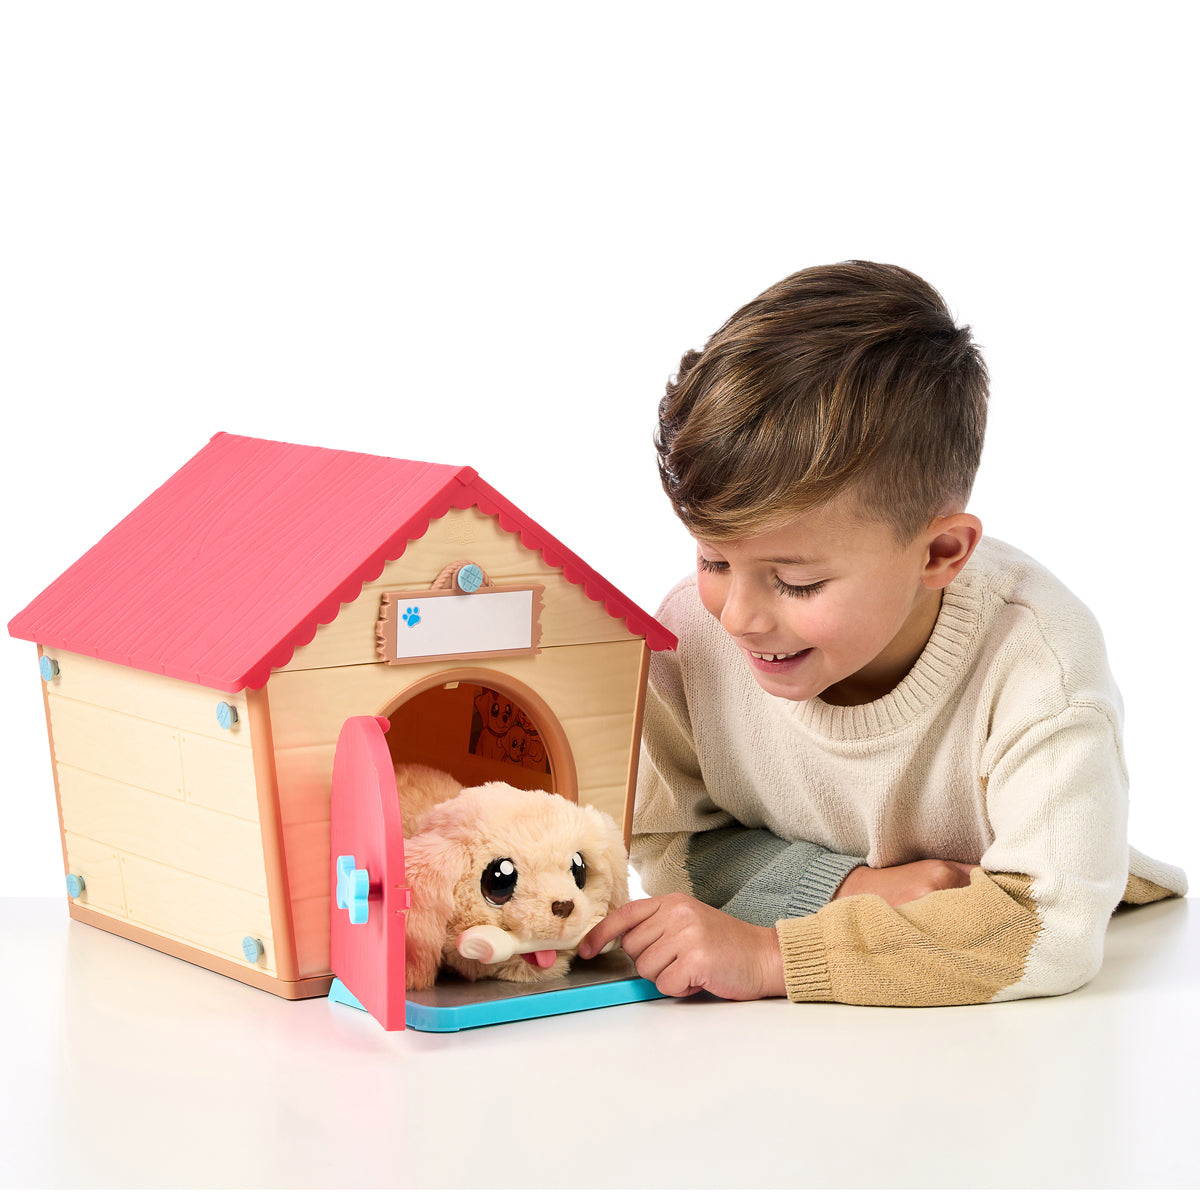 Little Live Pets My Puppy's Home Playset